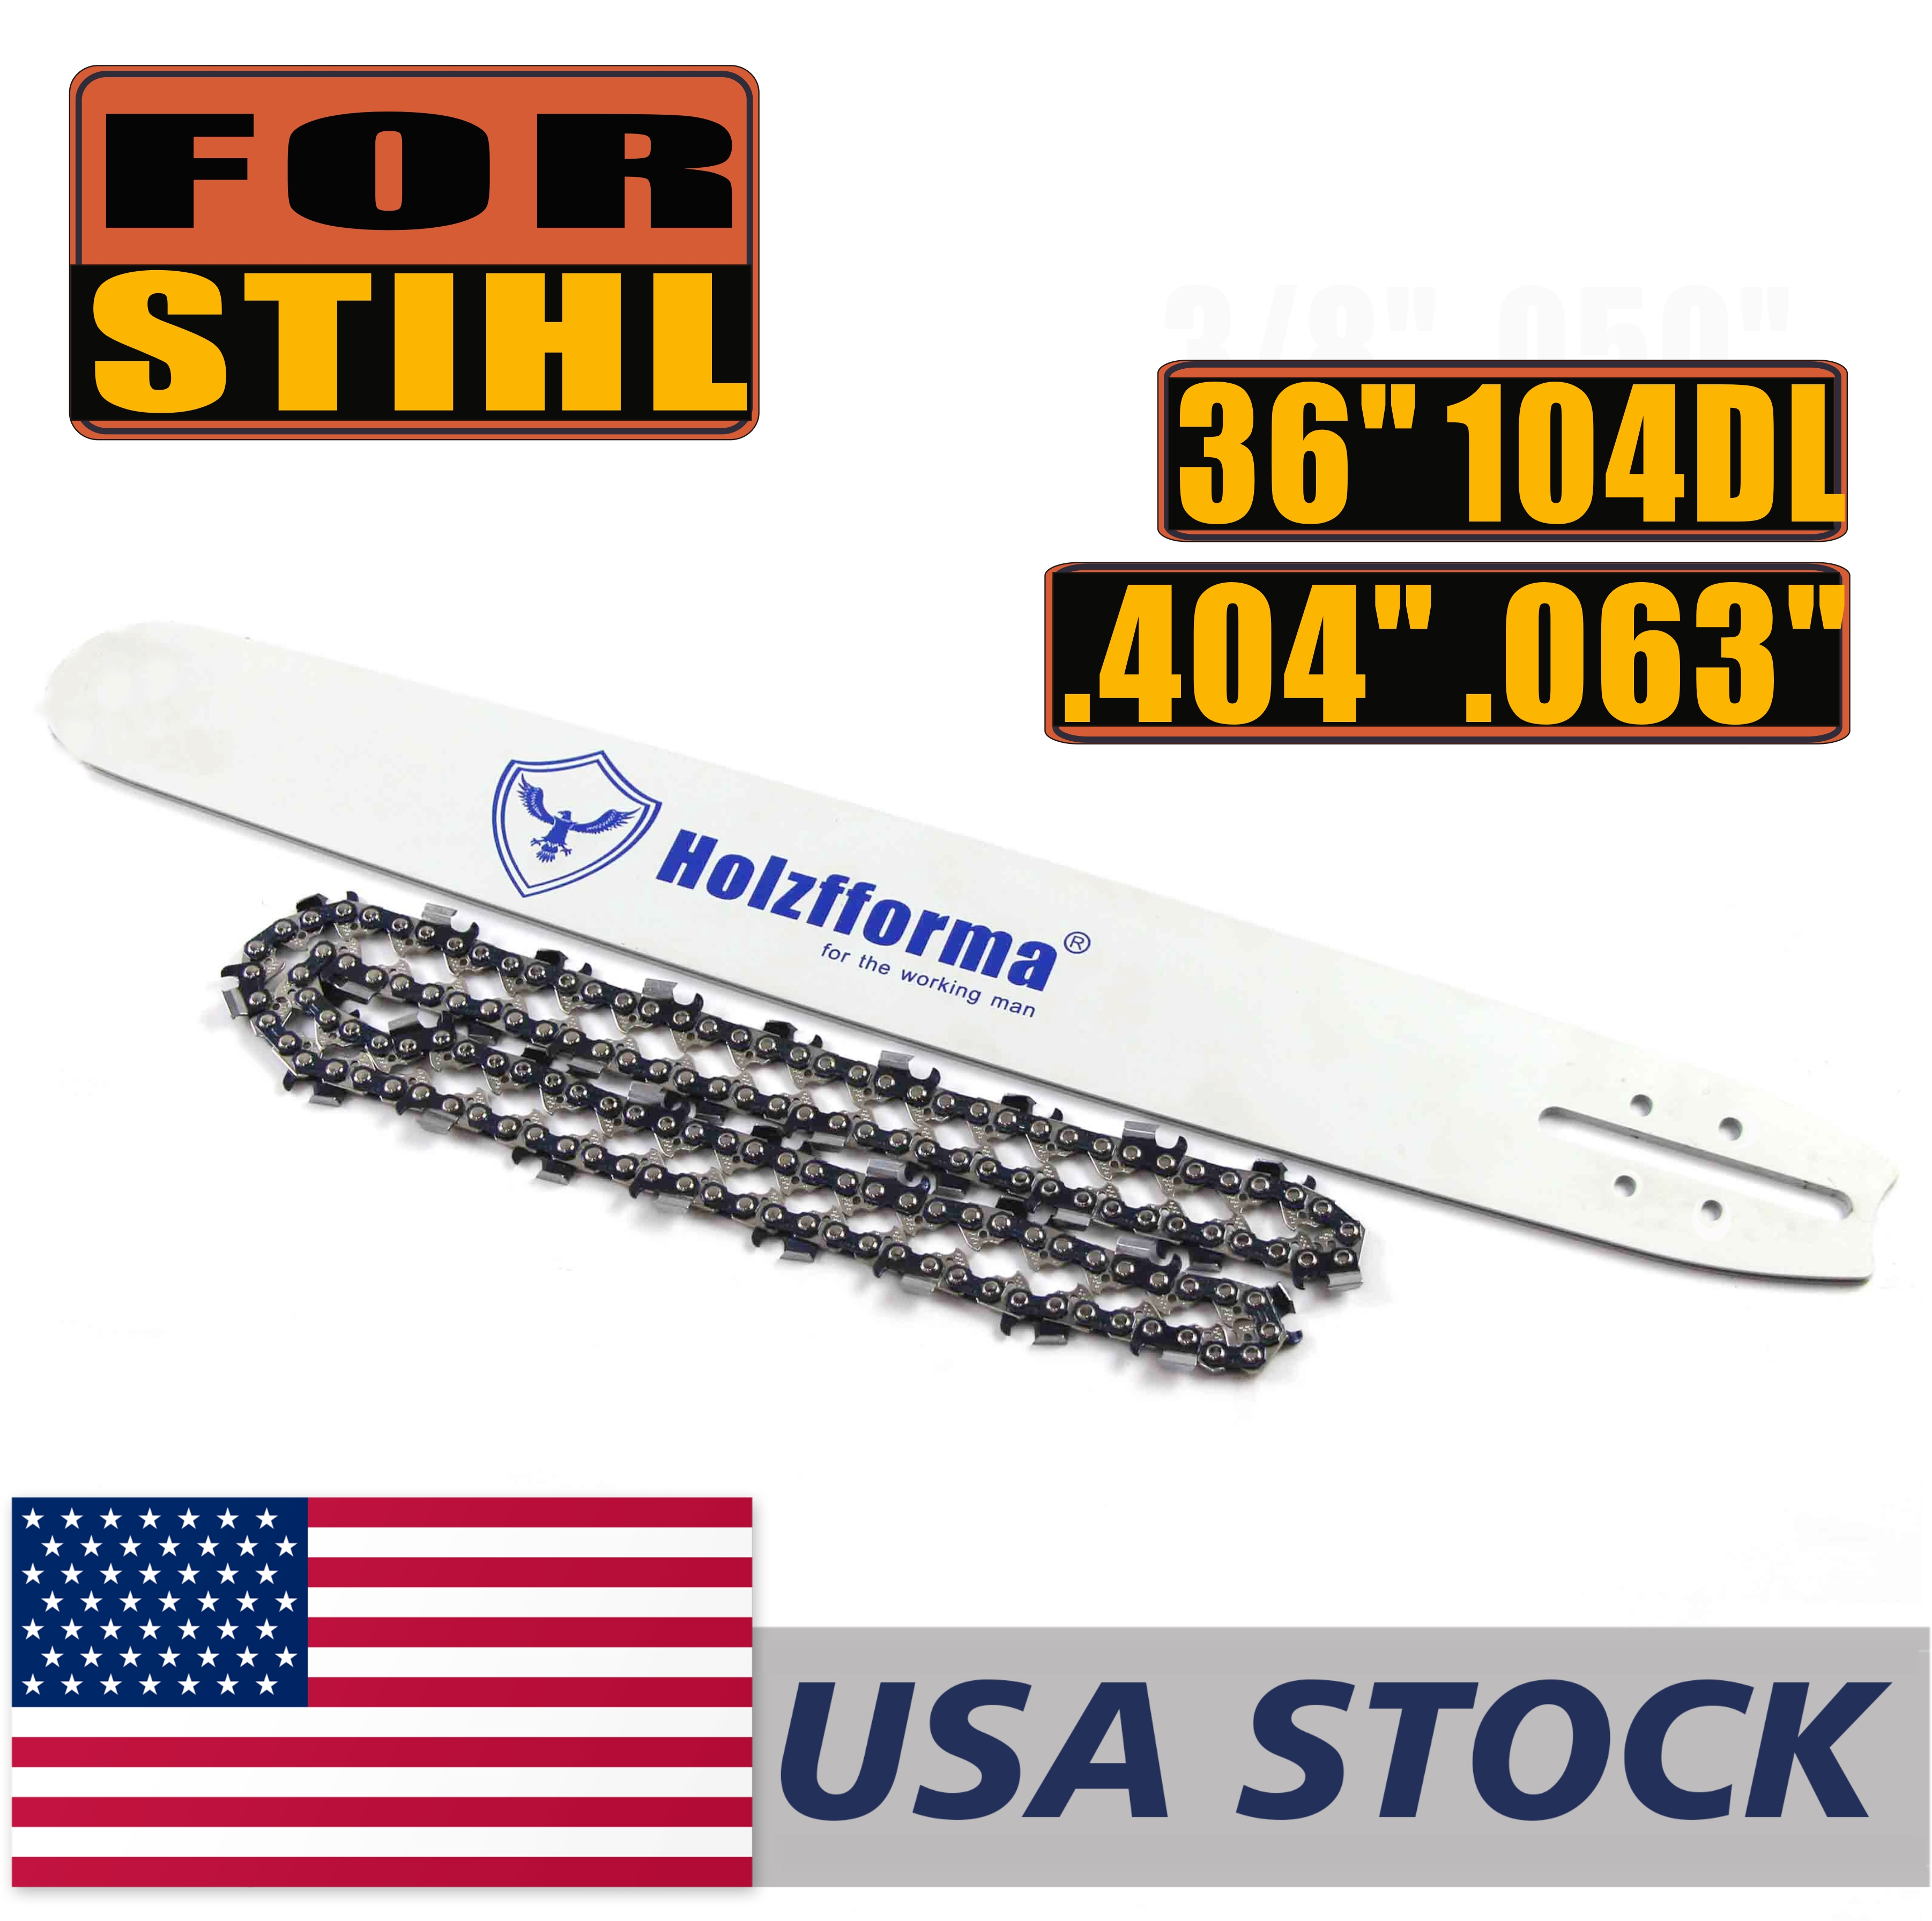 36" Guide Bar Saw Chain 3/8" .063" 114DL Compatible with Stihl MS440 MS460 MS660 